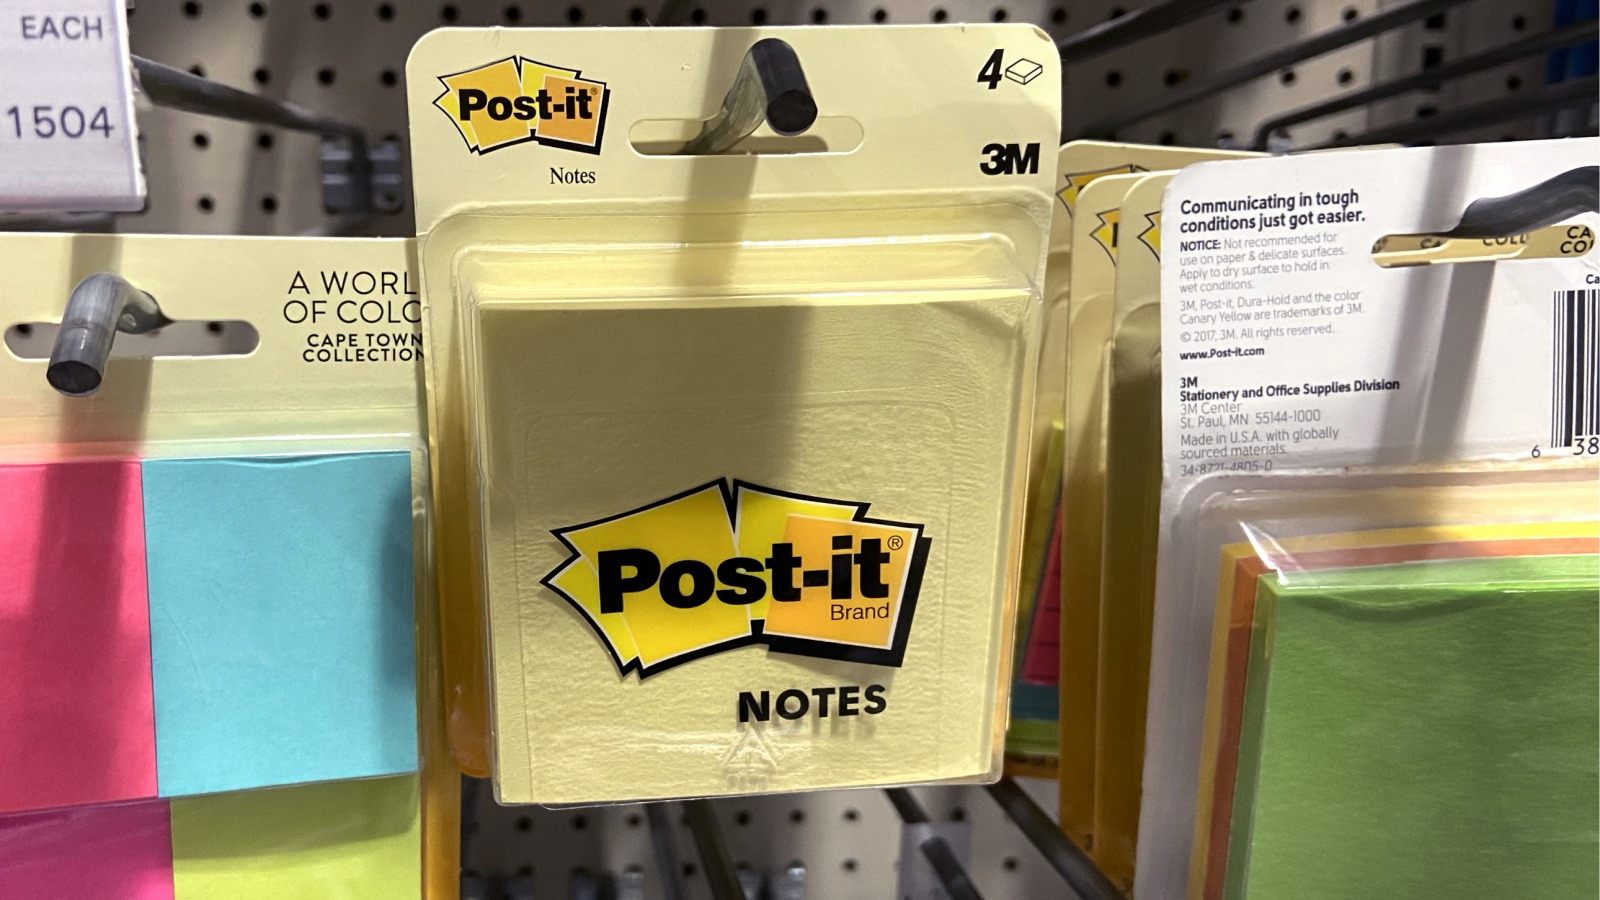 Post-its Invention or Accident?